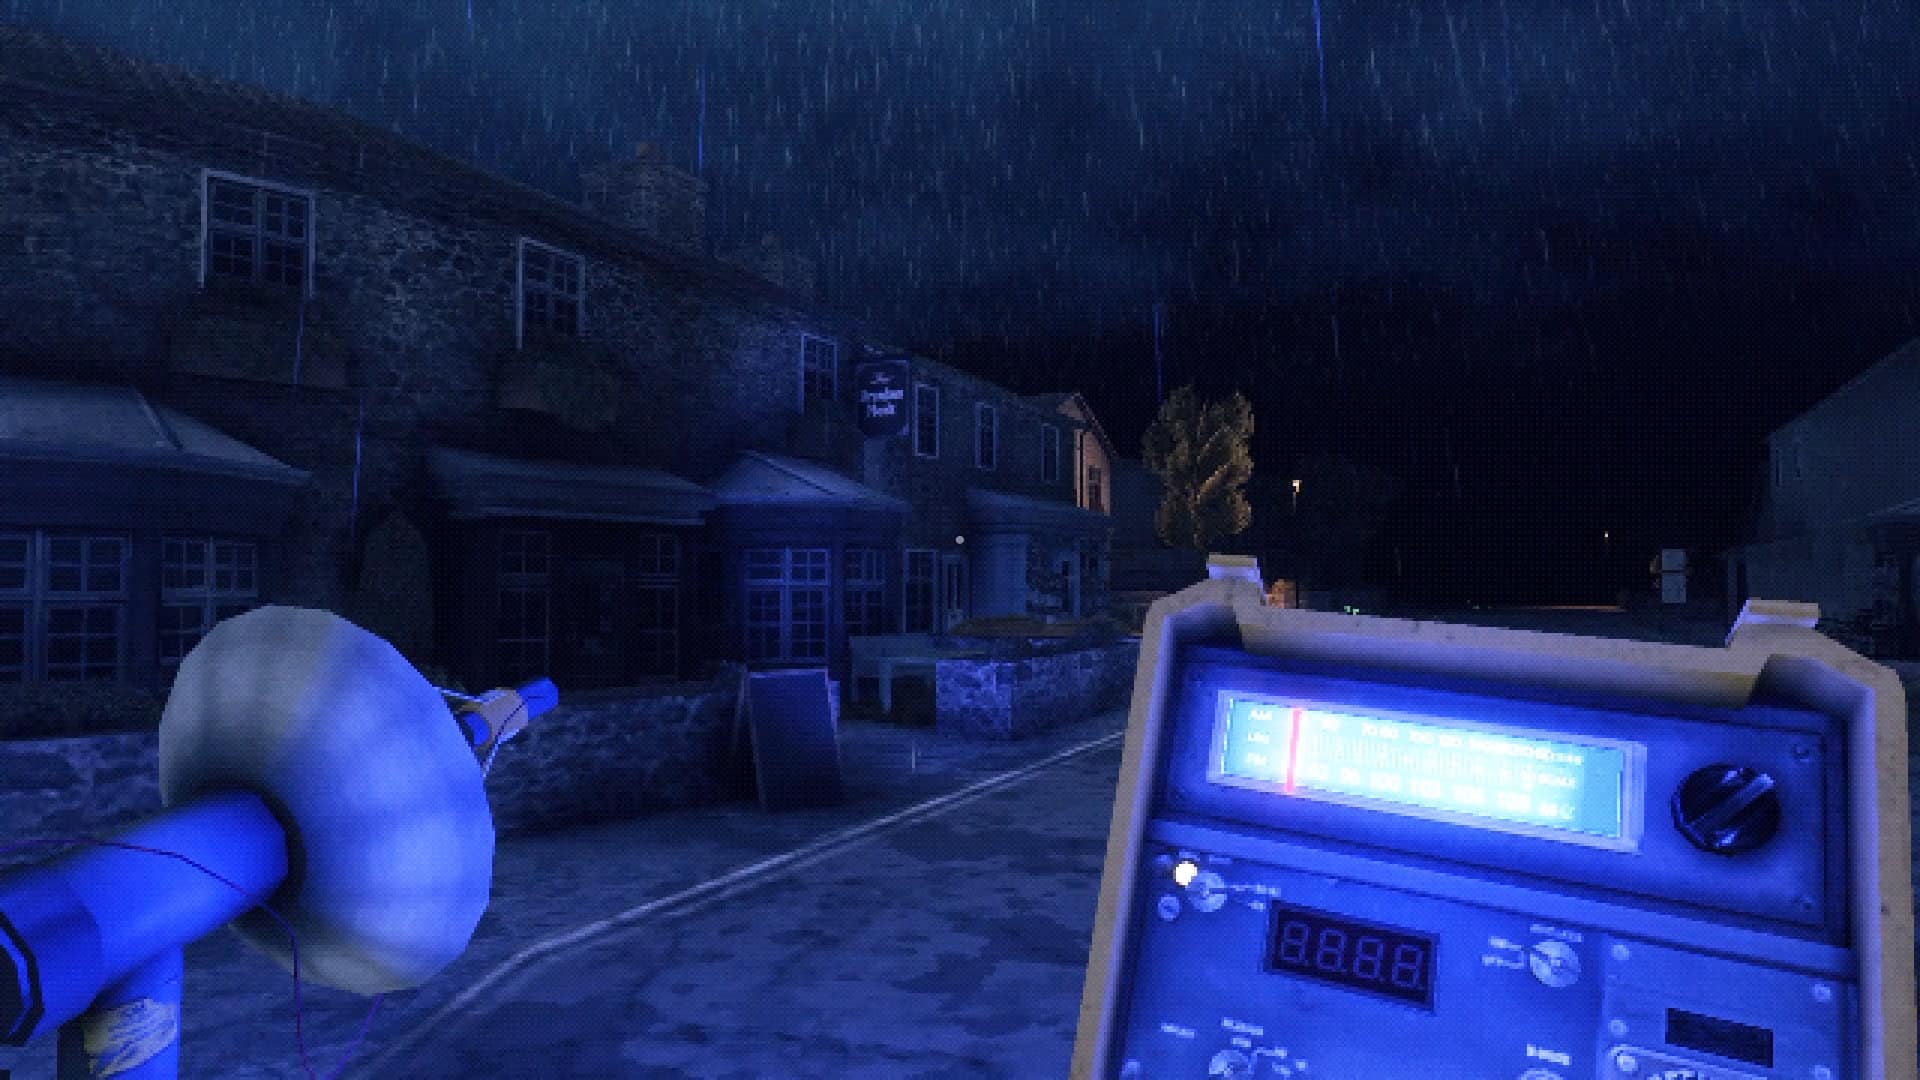 Chasing Static is a PS1-era inspired survival horror set for later this year